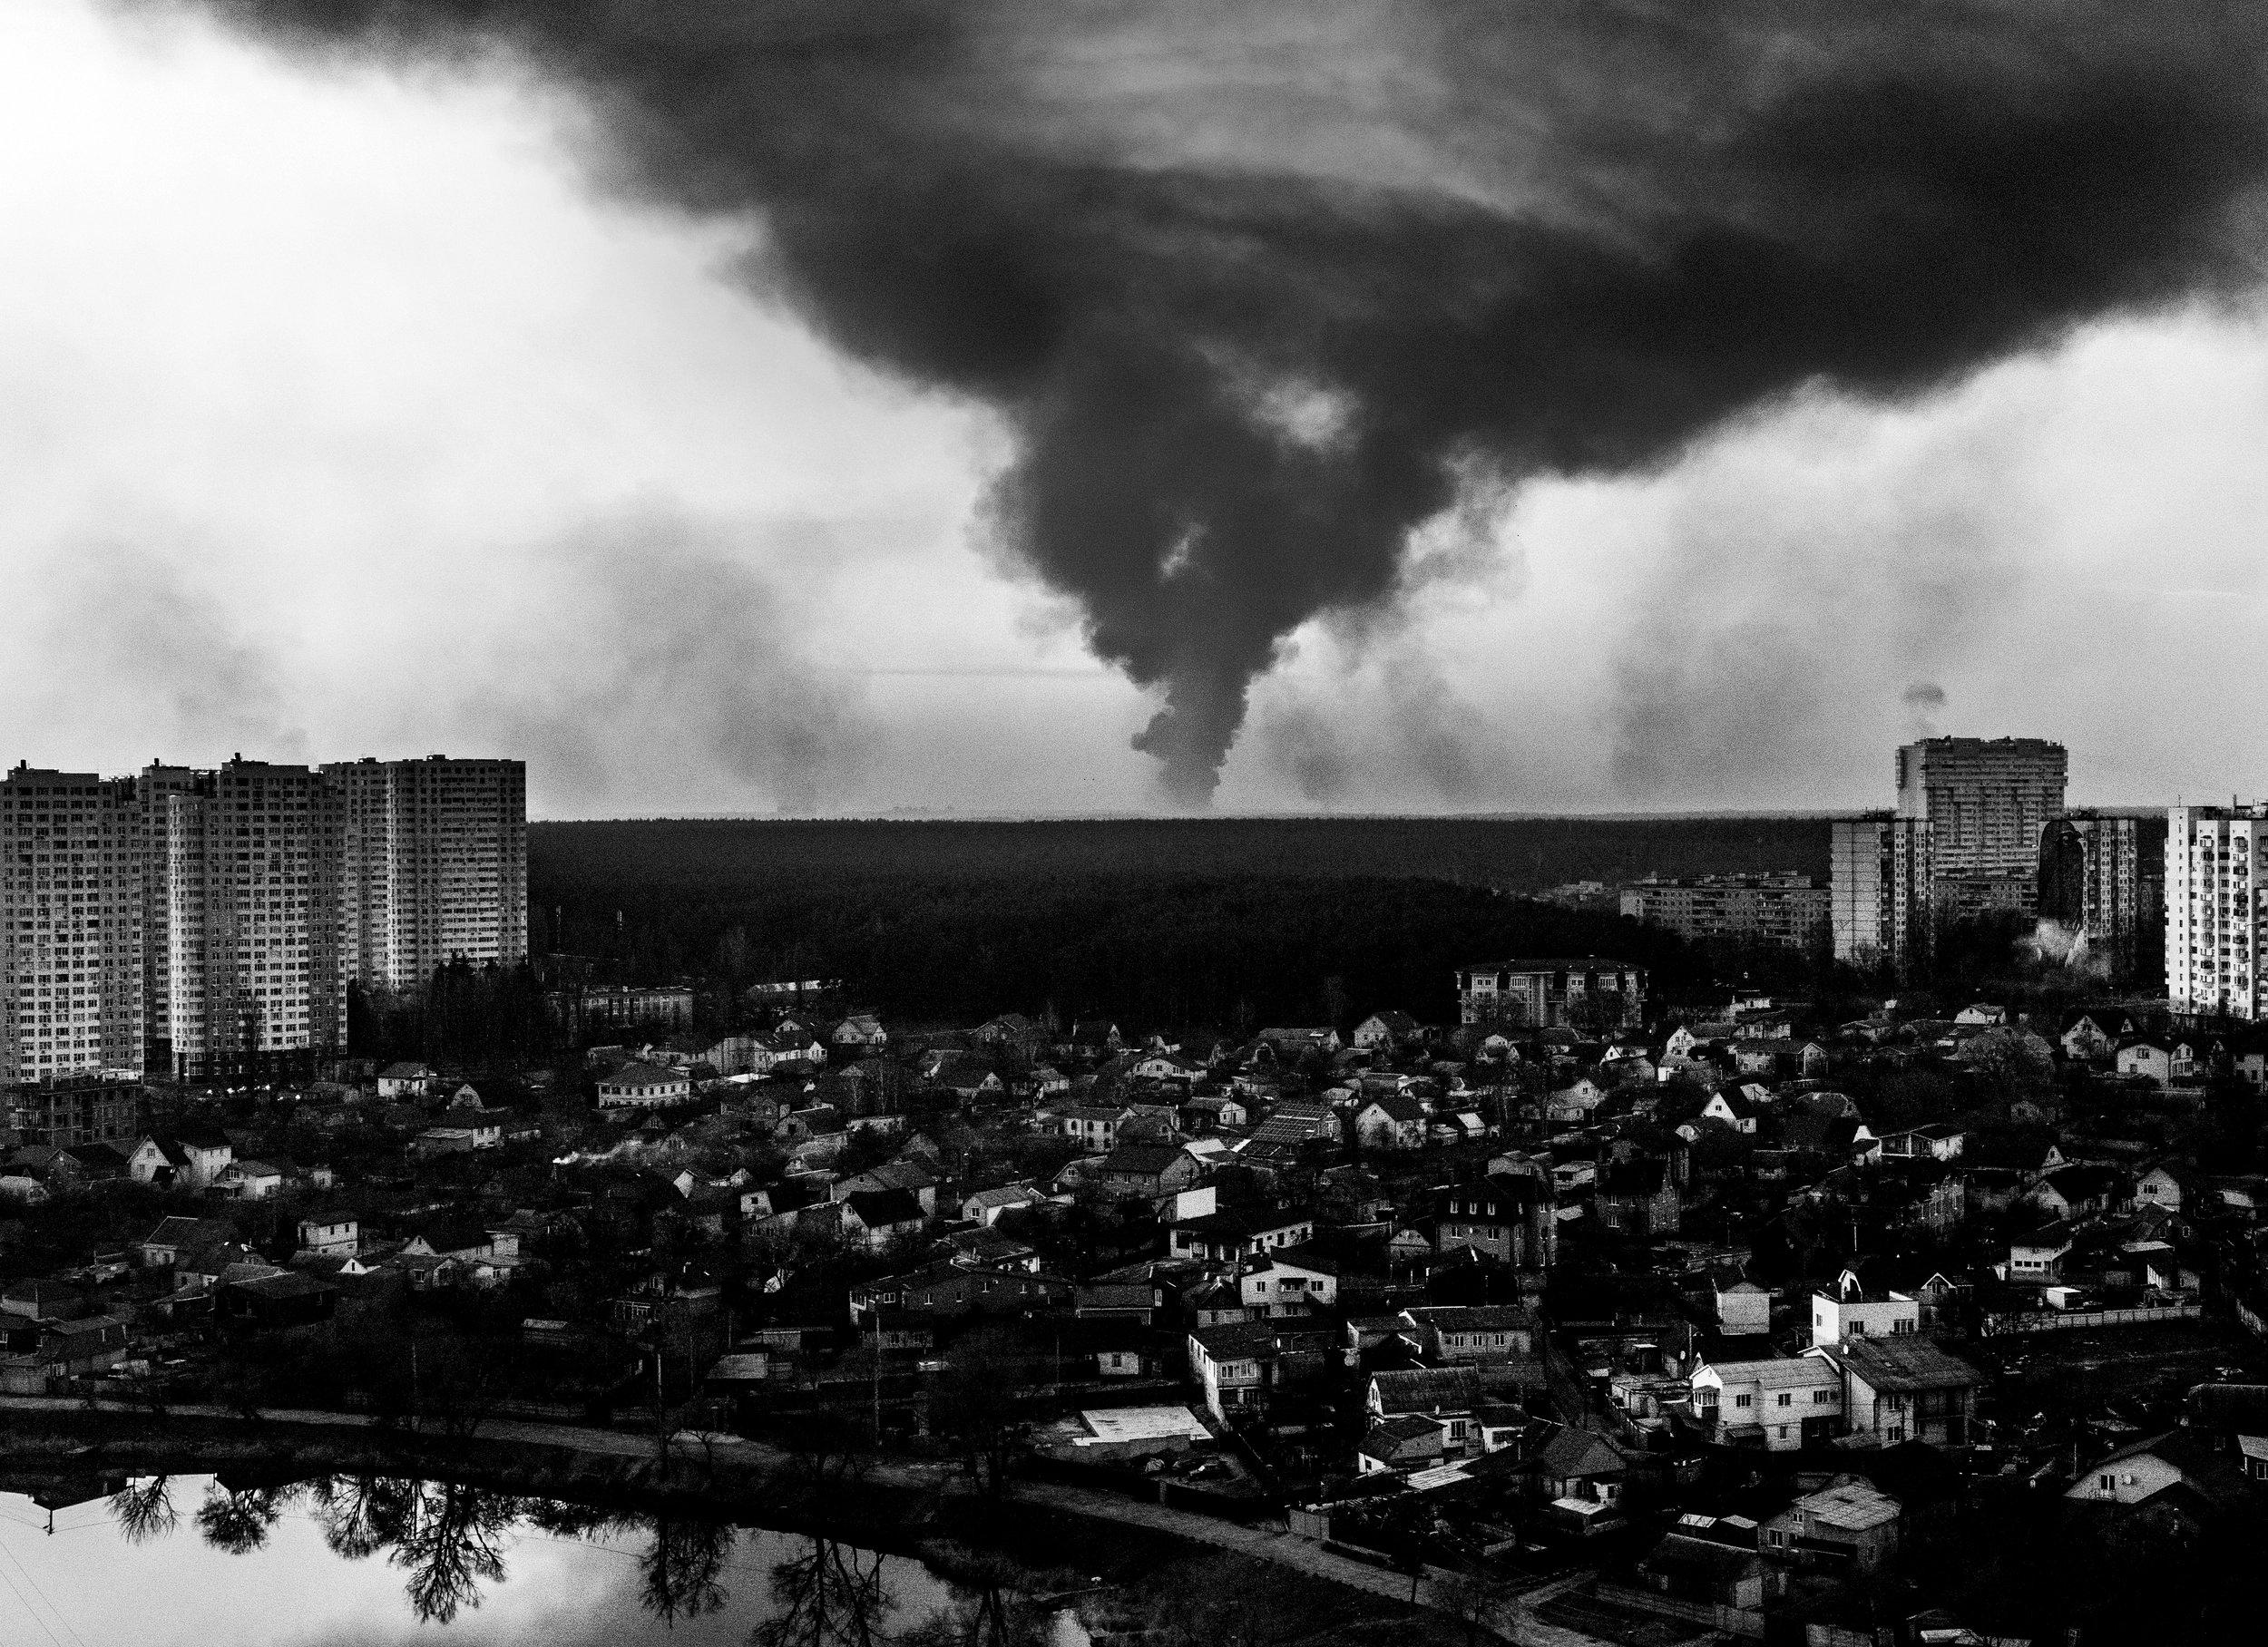  Multiple explosions from Irpin and surrounding regions are seen from the top floor balcony of a residential building in Kyiv. 